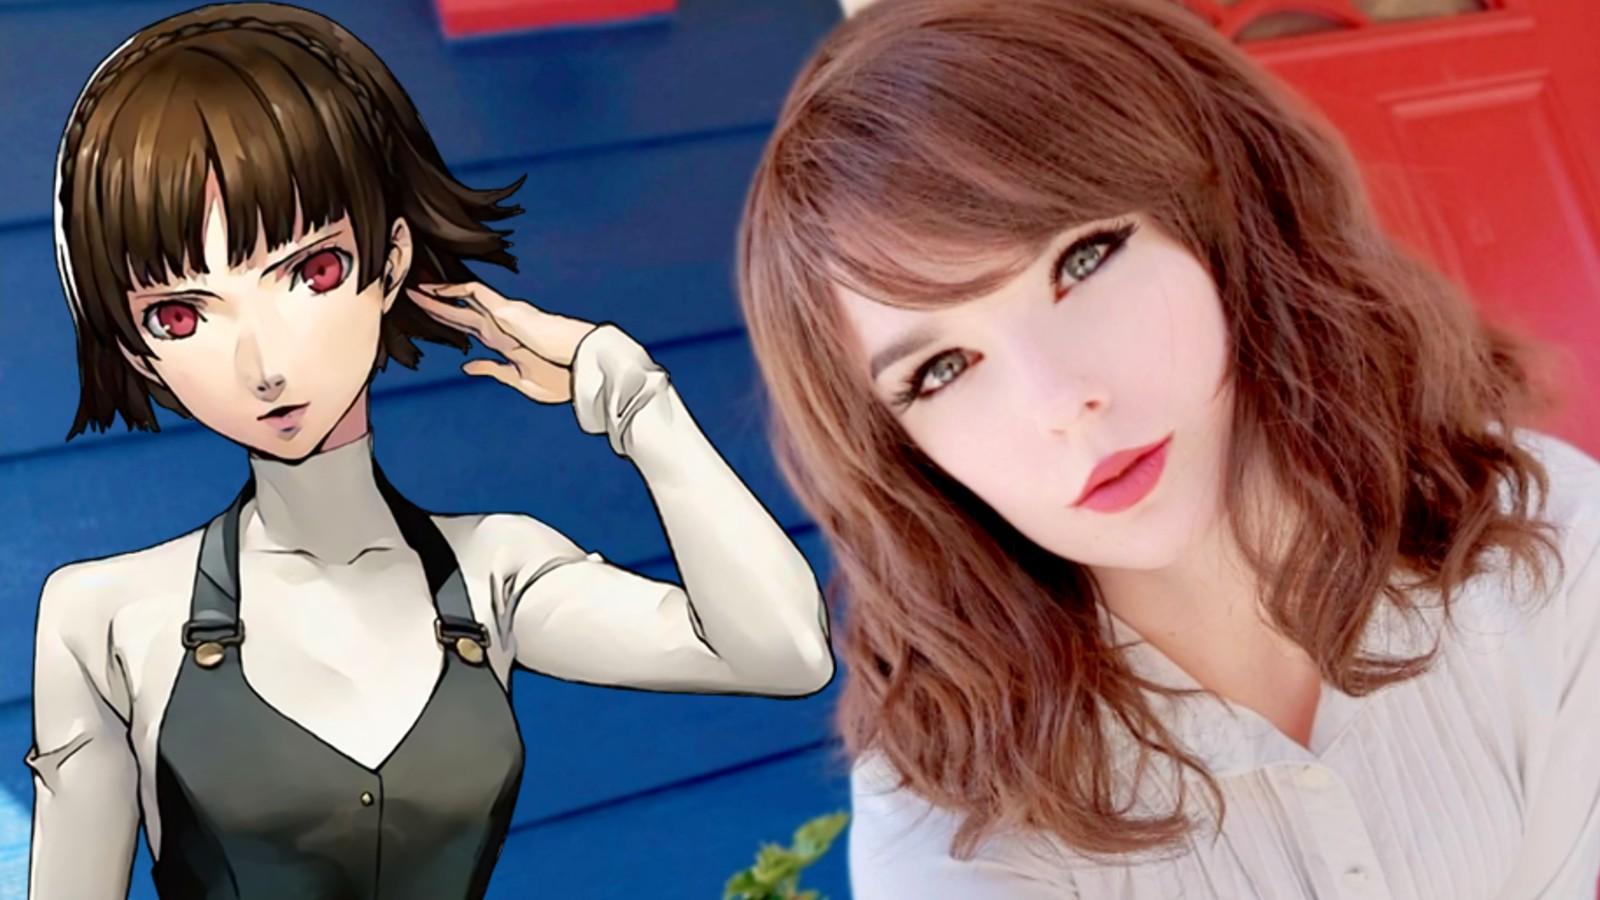 Cosplayer togasthighs next to Makoto from Persona 5